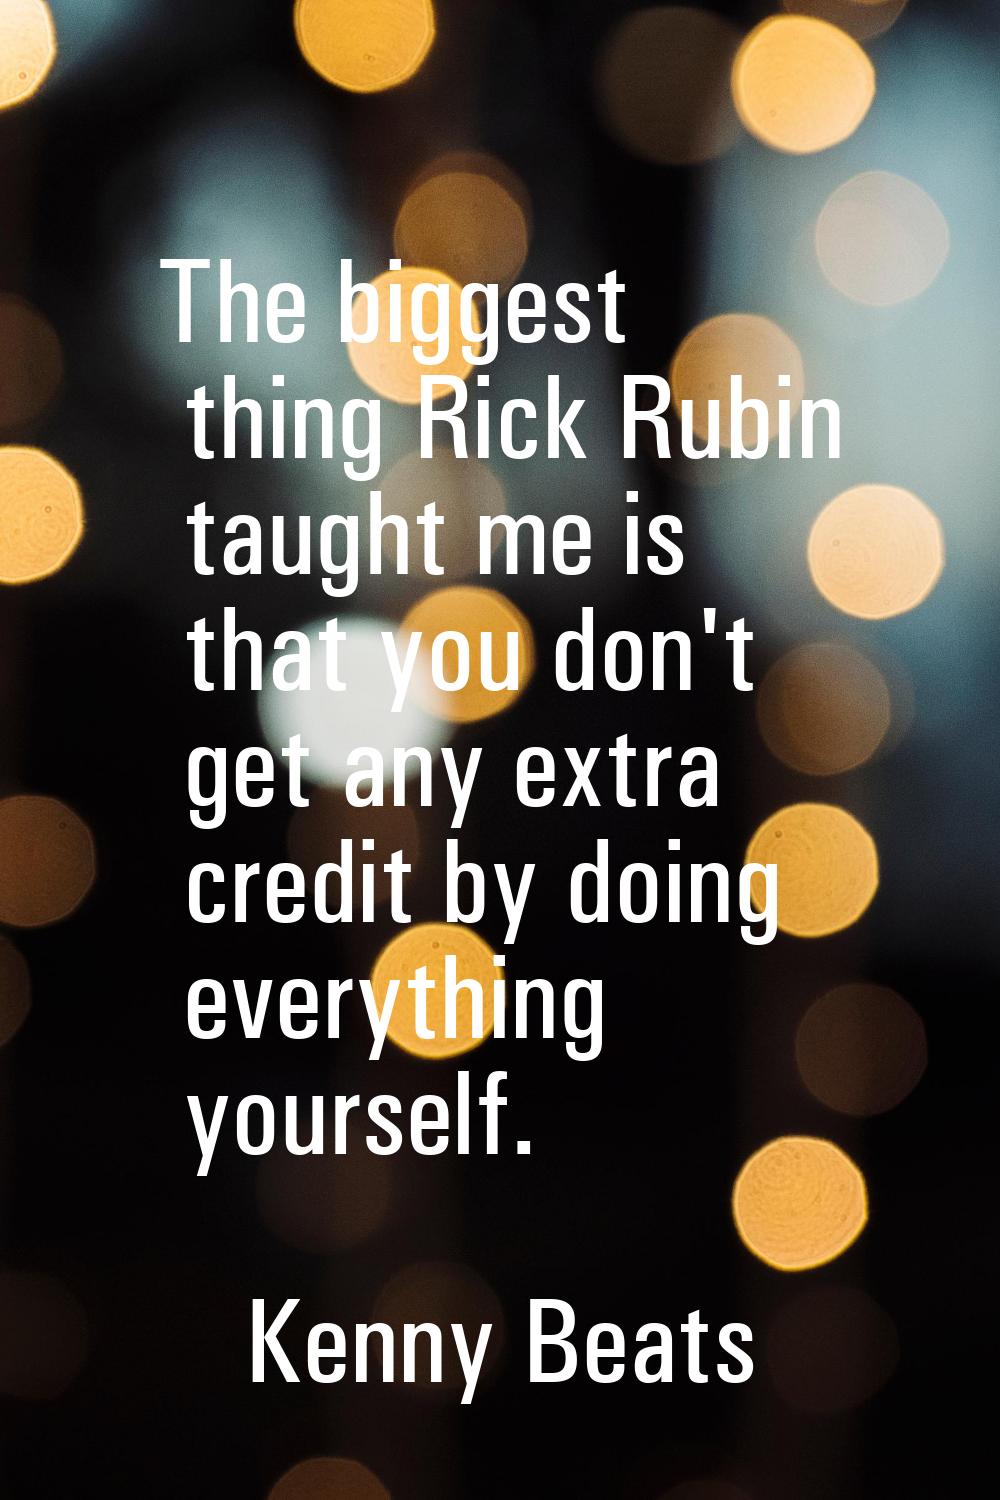 The biggest thing Rick Rubin taught me is that you don't get any extra credit by doing everything y